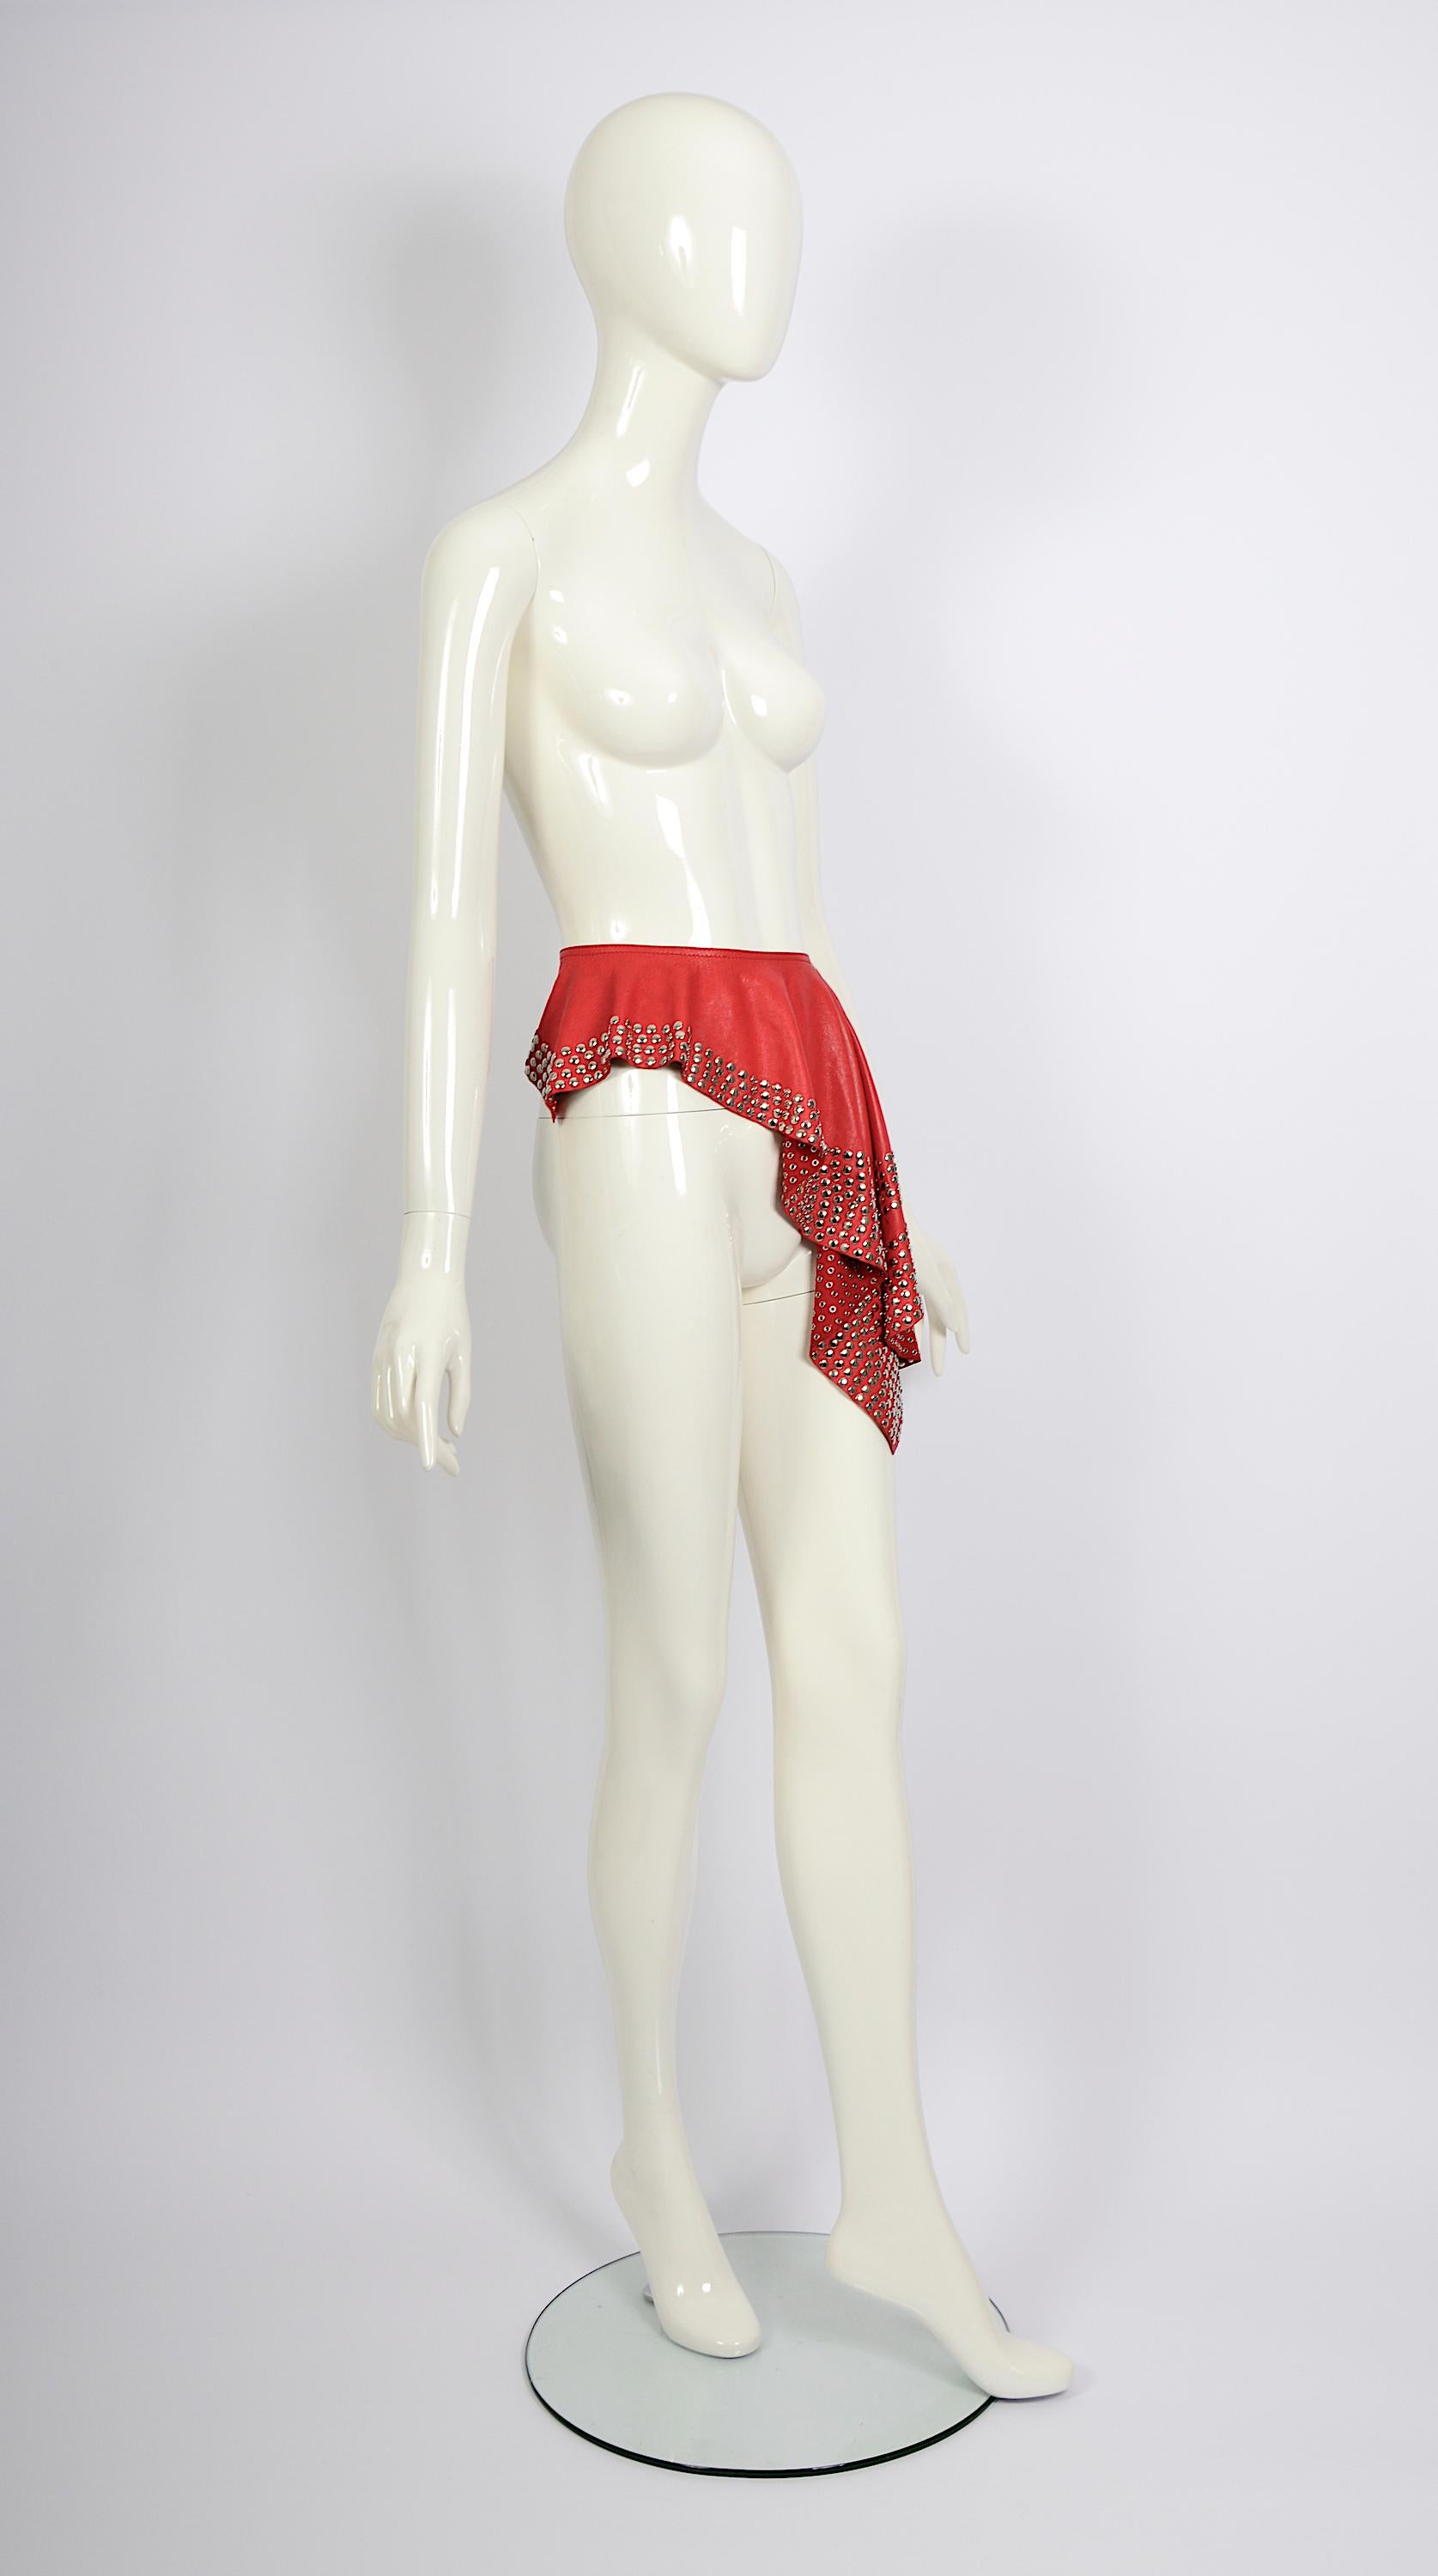 Azzedine Alaia circa 1981 collectionneurs Studded embellished red leather belt skirt Pour femmes en vente